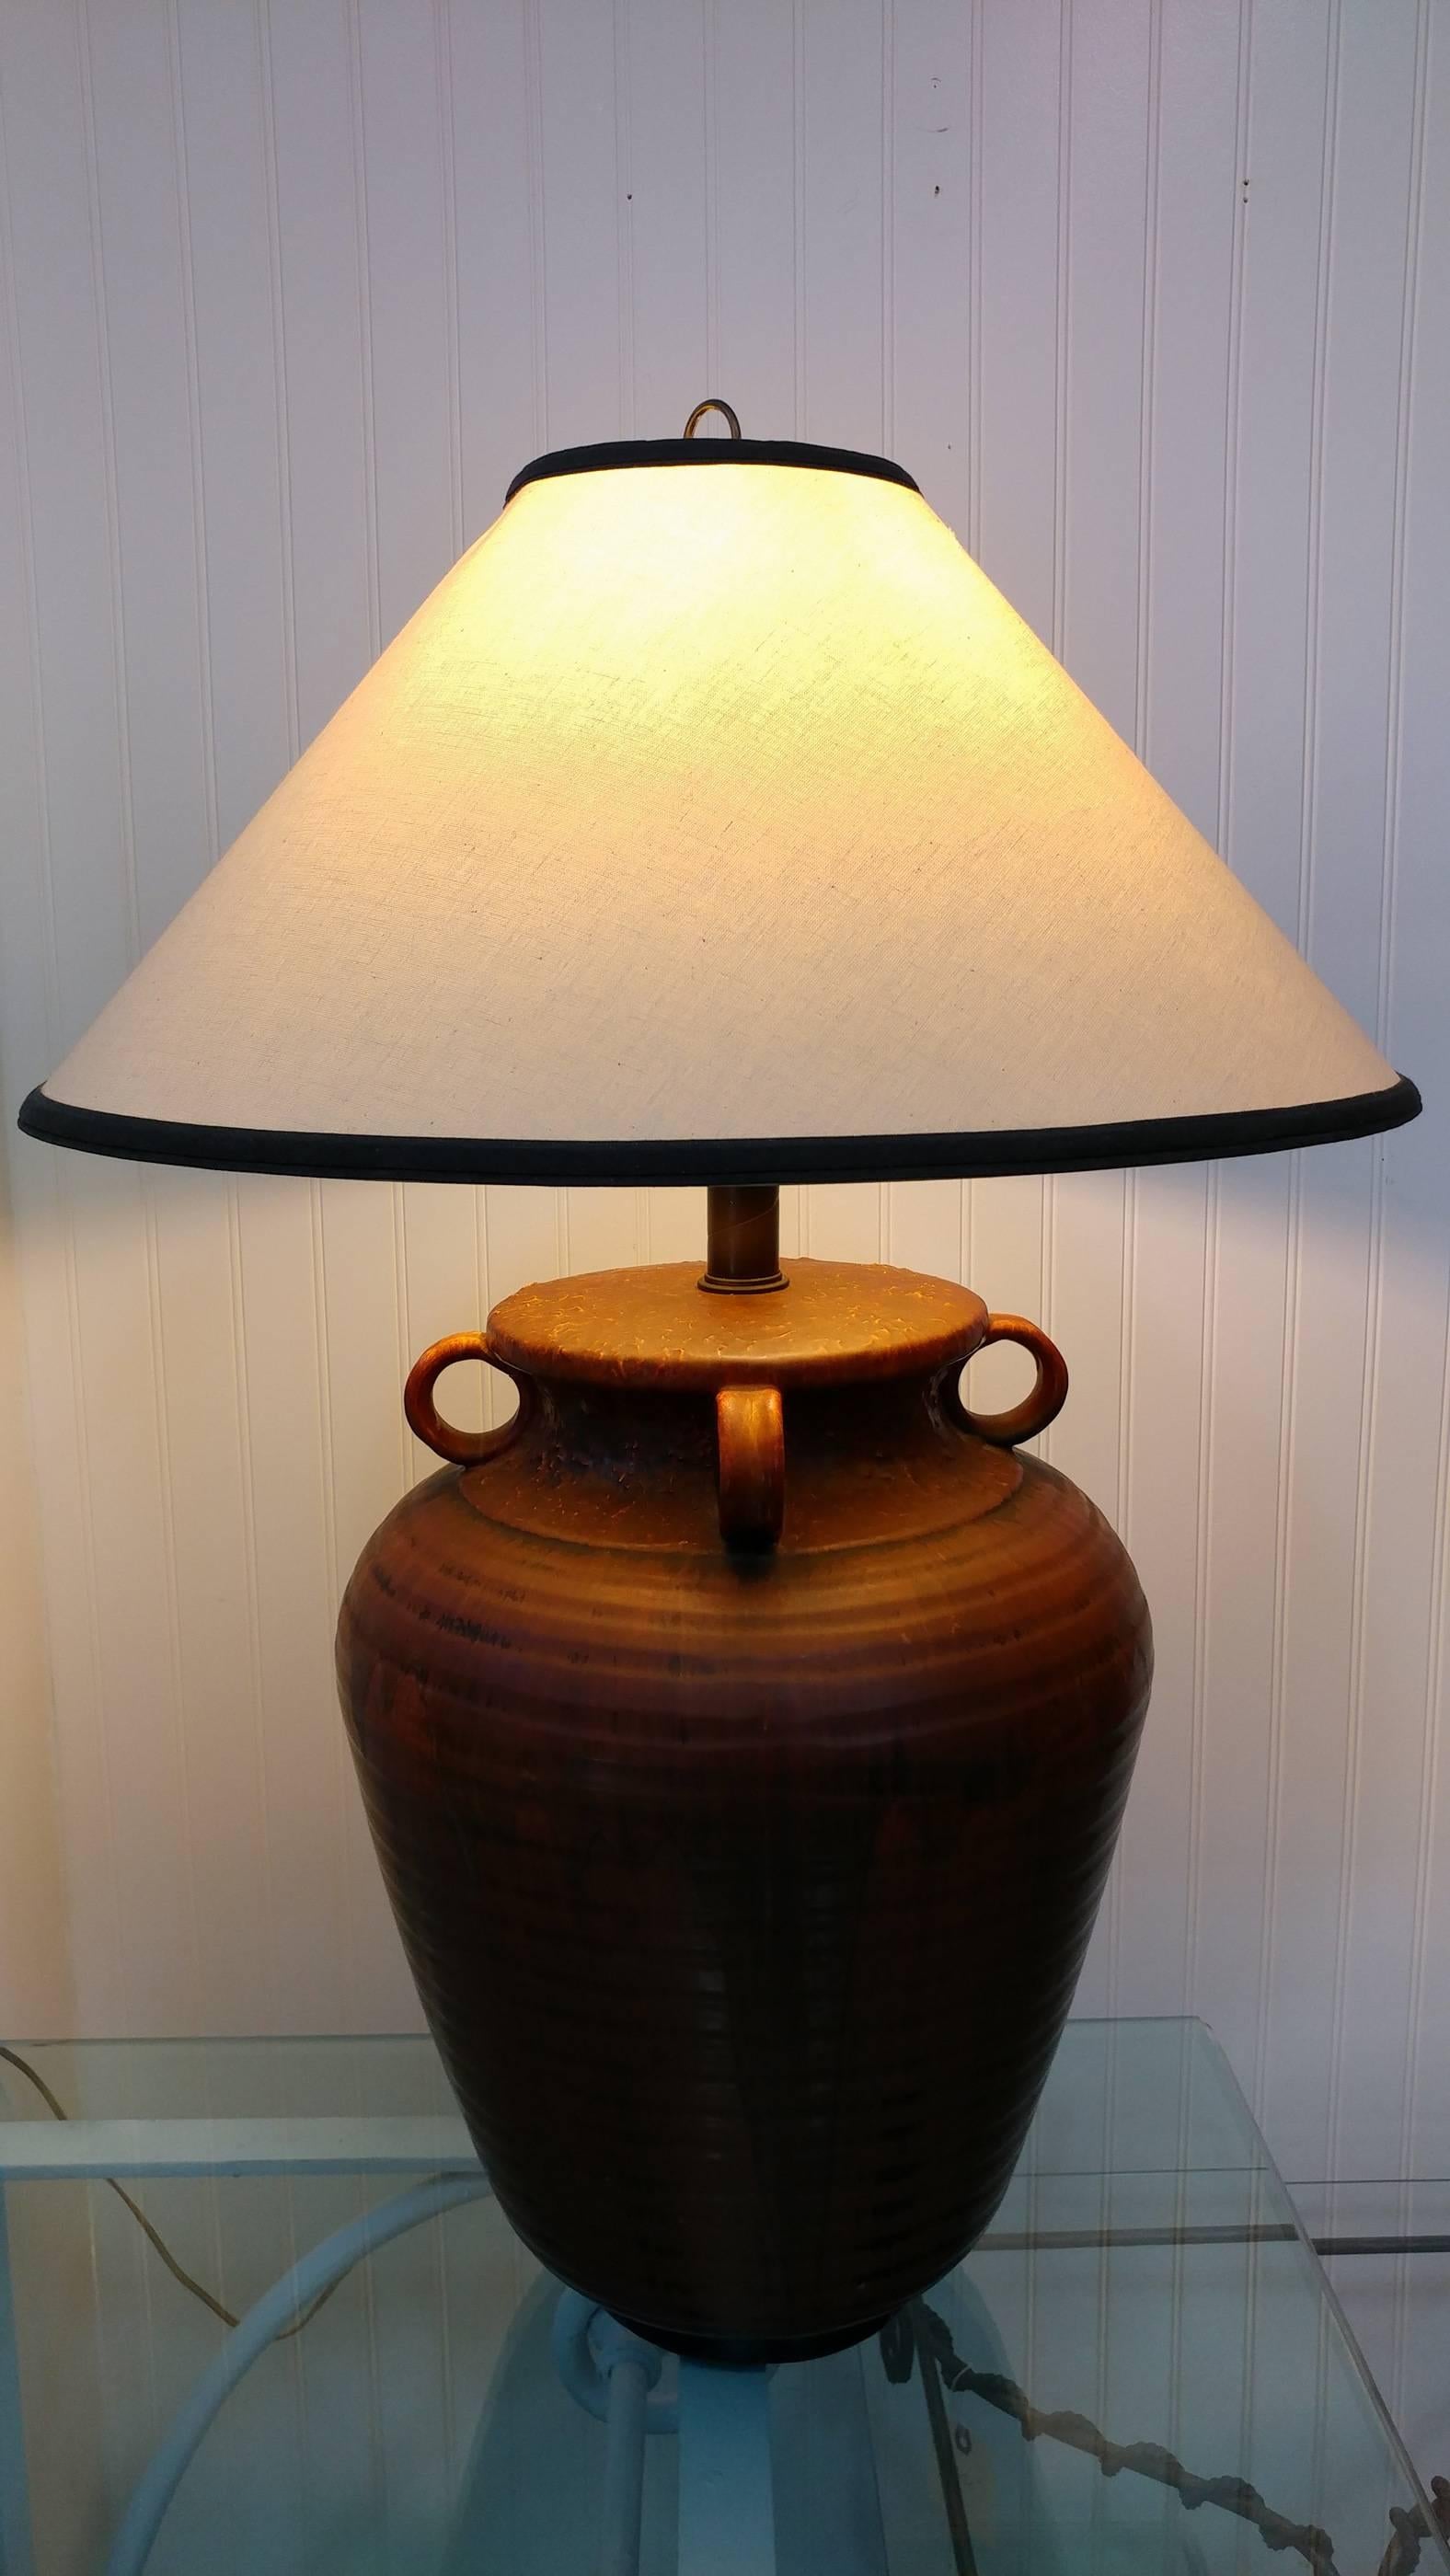 American Nardini Studios Incised Drip Glazed Ovoid Jar Table Lamp, Offered by La Porte For Sale